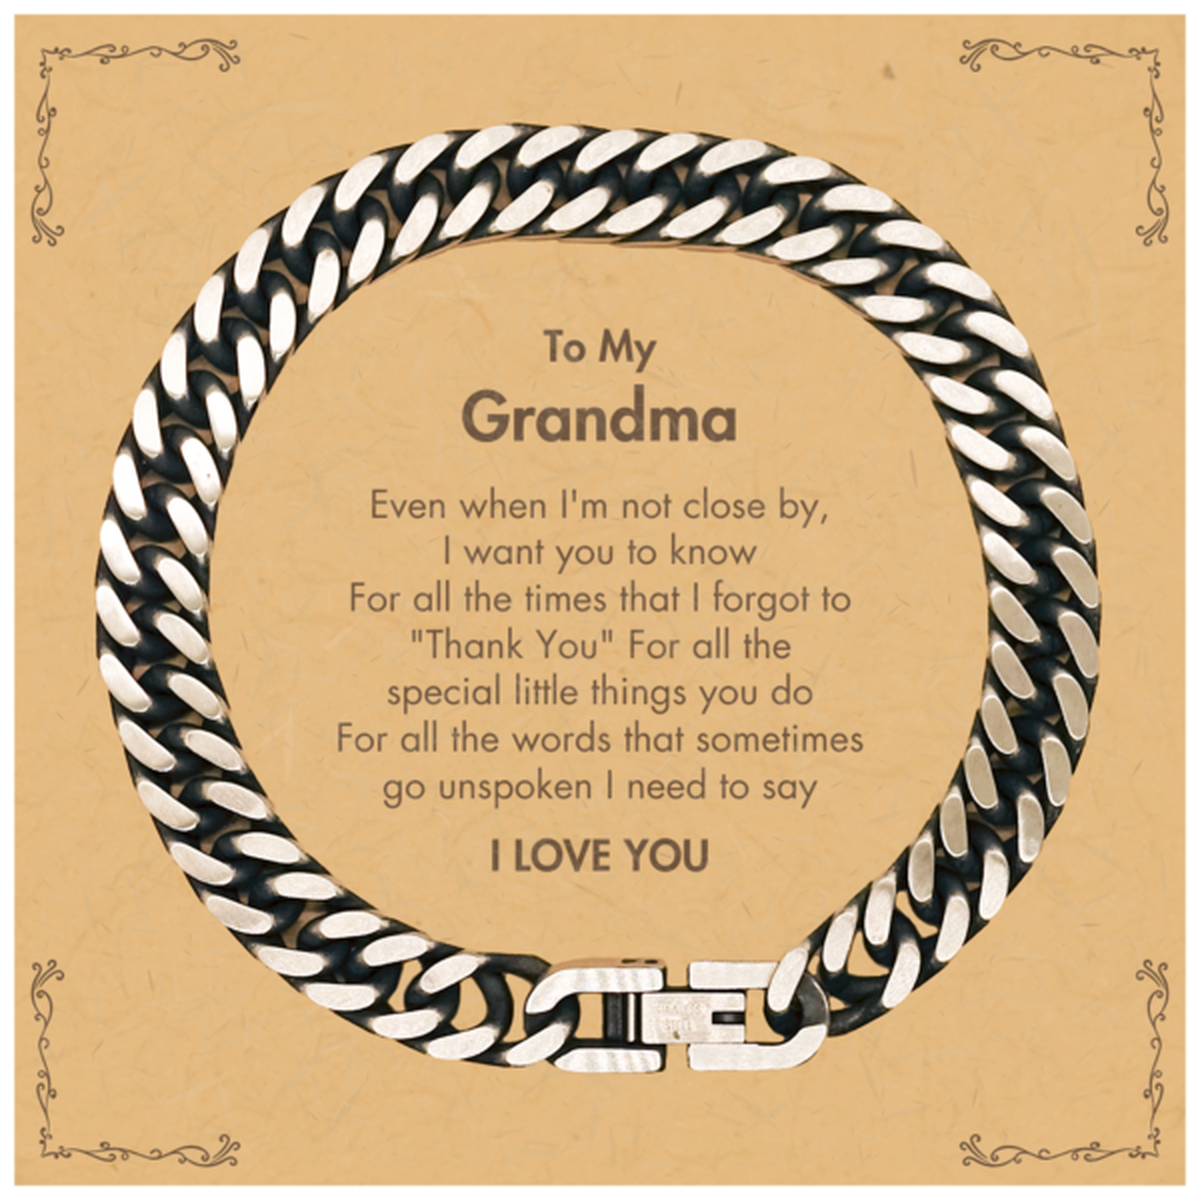 Thank You Gifts for Grandma, Keepsake Cuban Link Chain Bracelet Gifts for Grandma Birthday Mother's day Father's Day Grandma For all the words That sometimes go unspoken I need to say I LOVE YOU